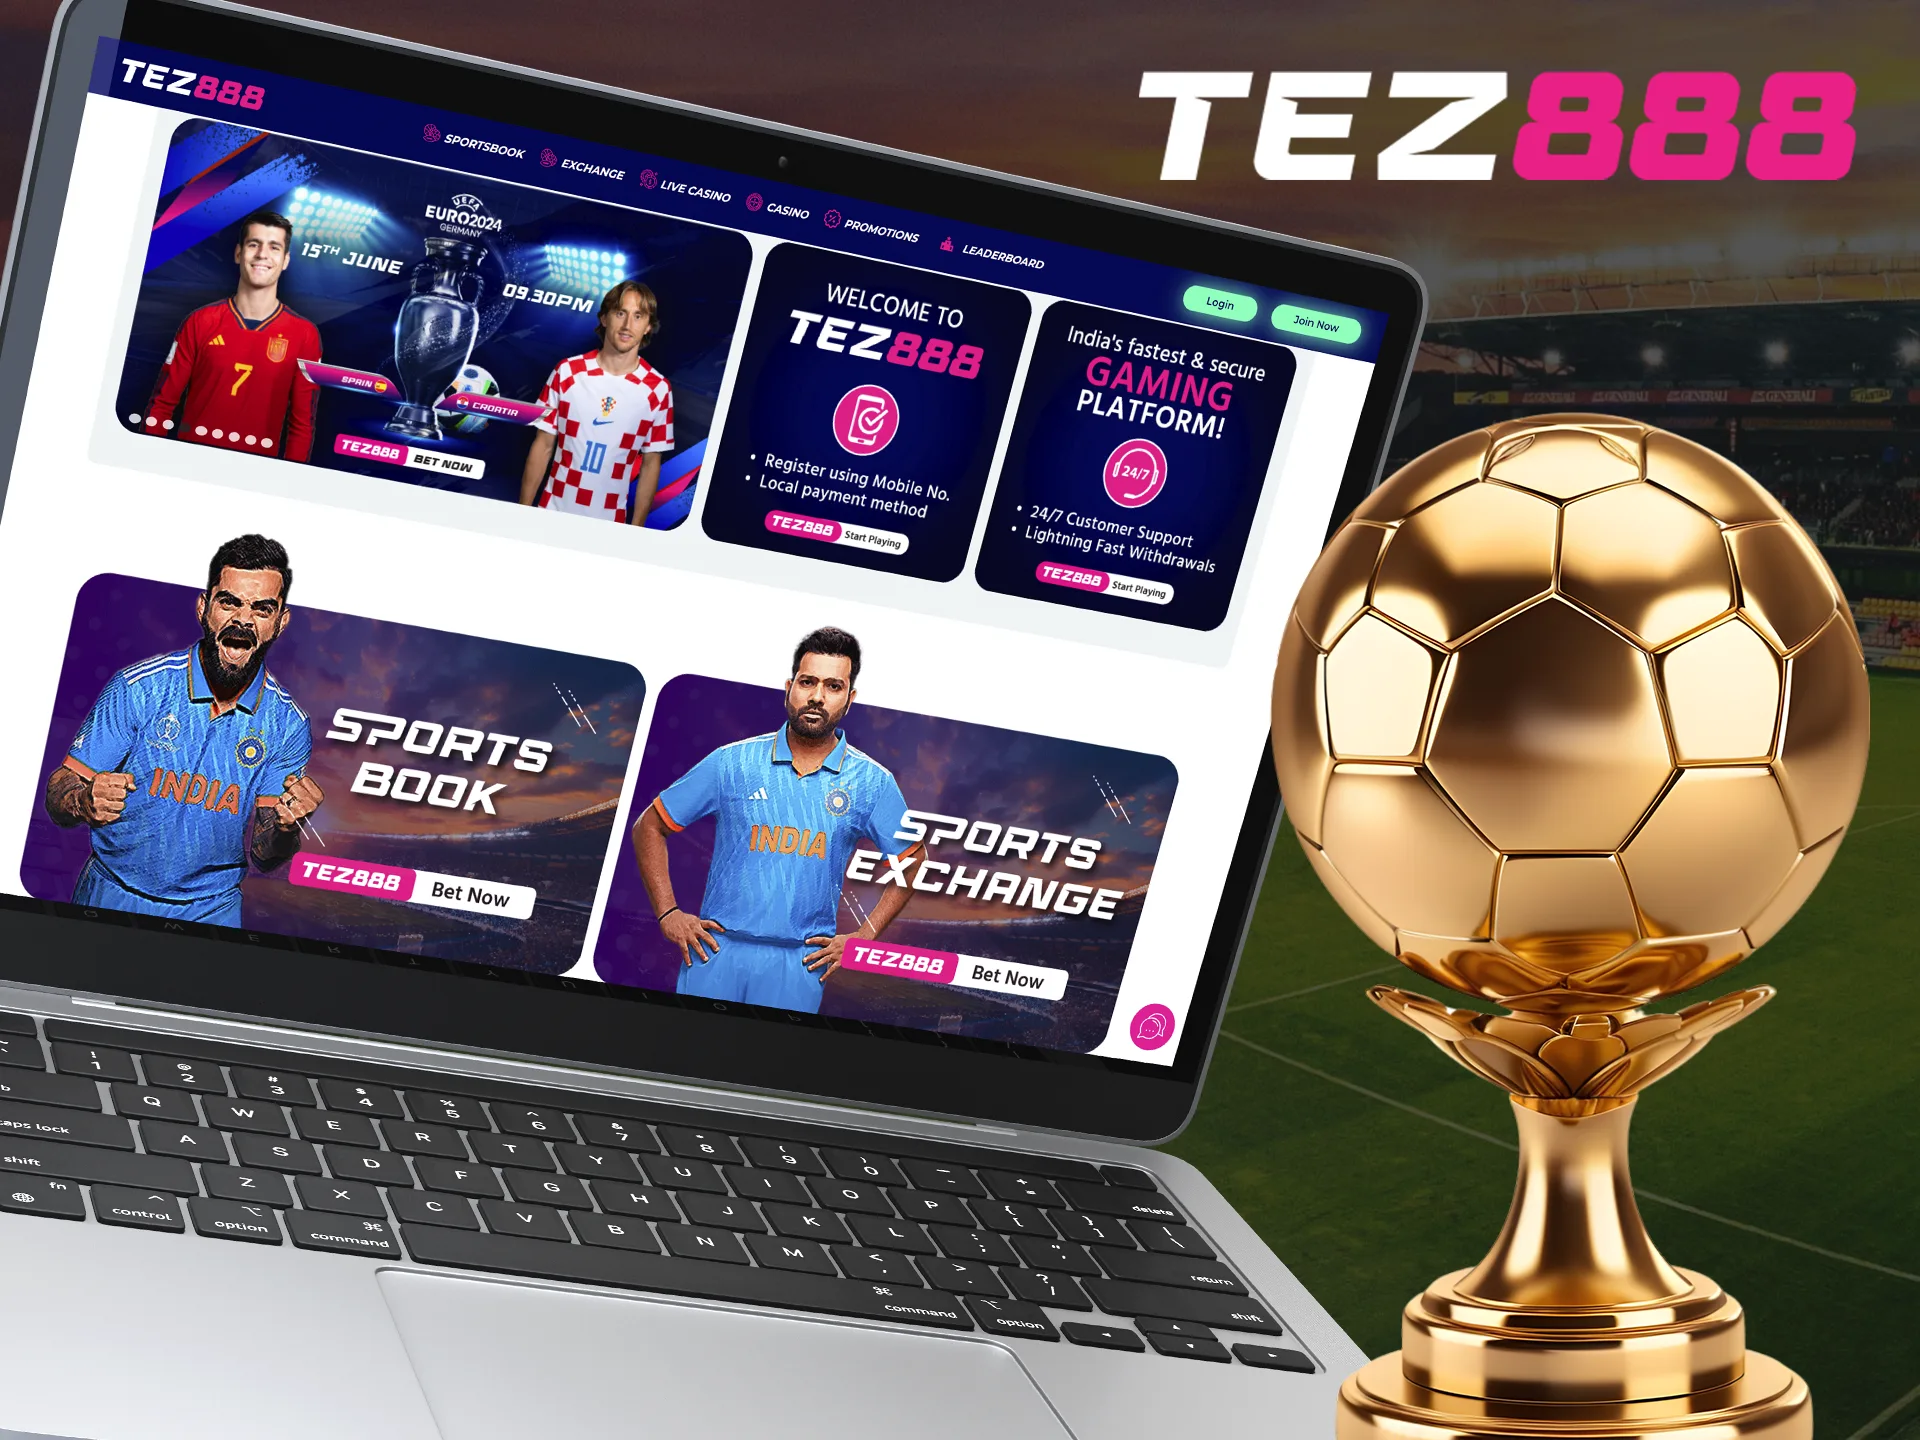 Check out information on popular tournaments you can bet on at Tez888.